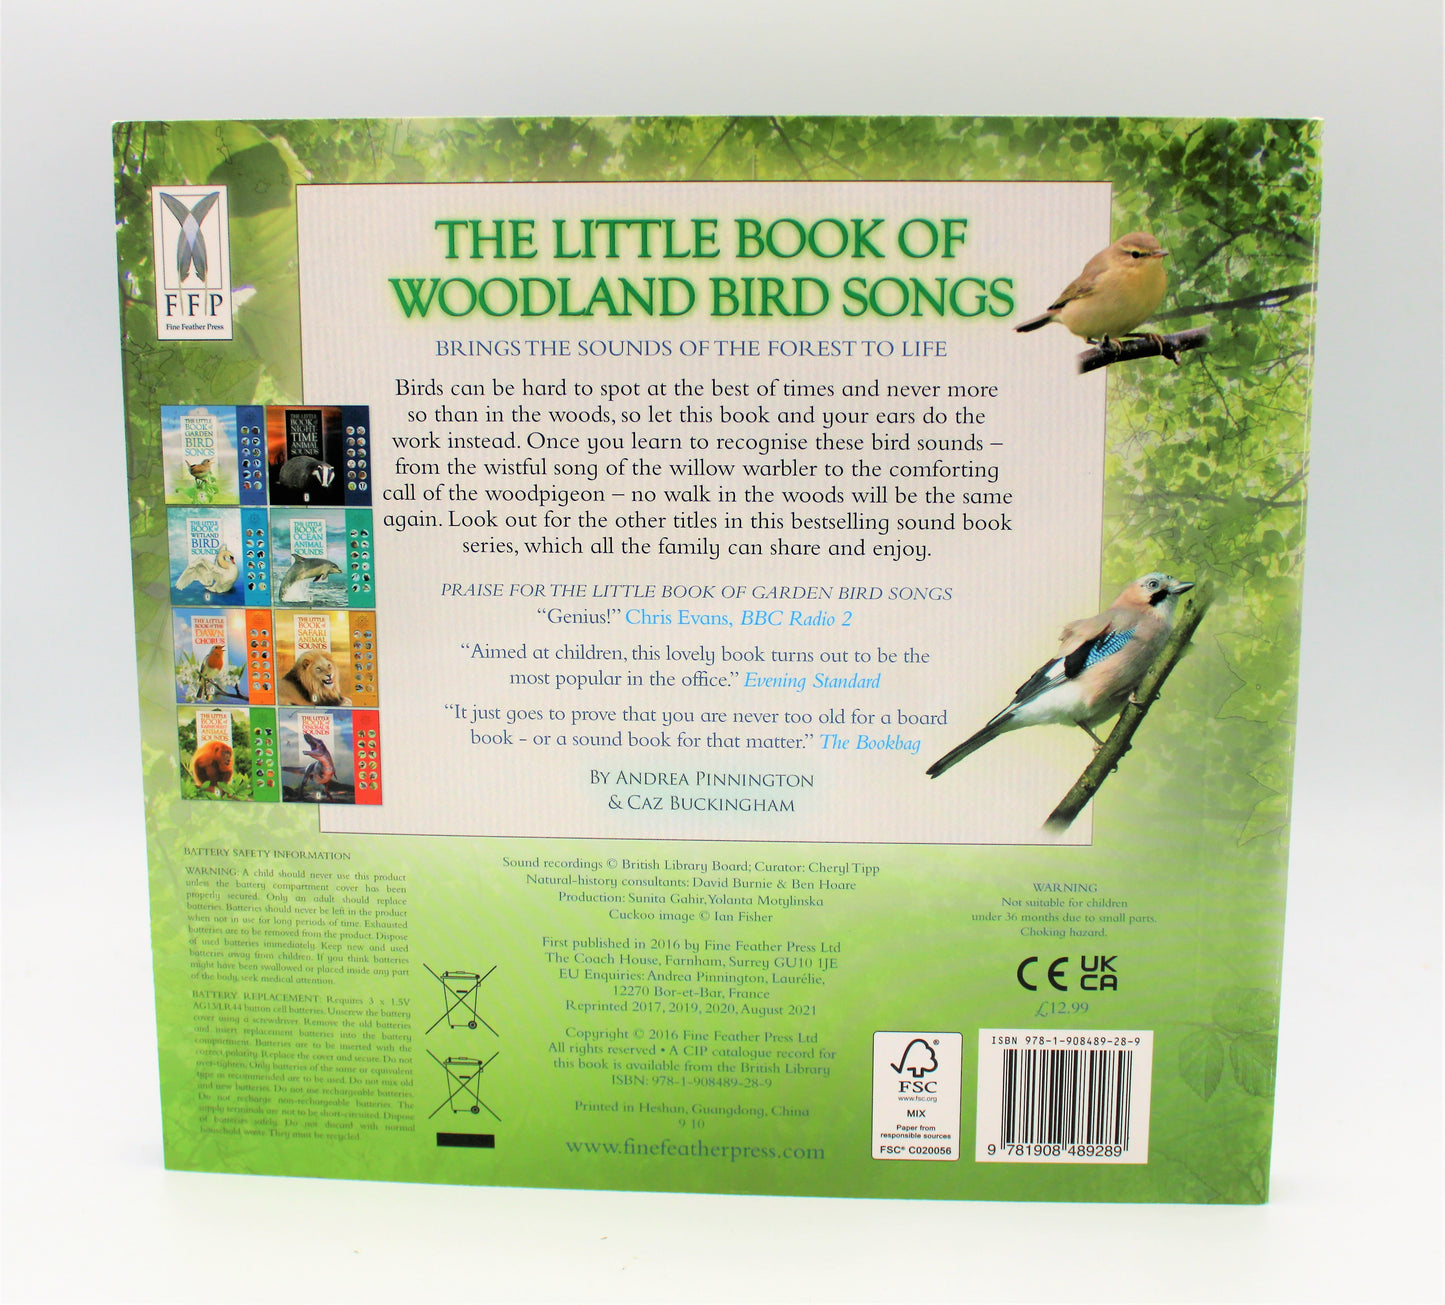 The Little Book of Woodland Bird Songs Back Cover